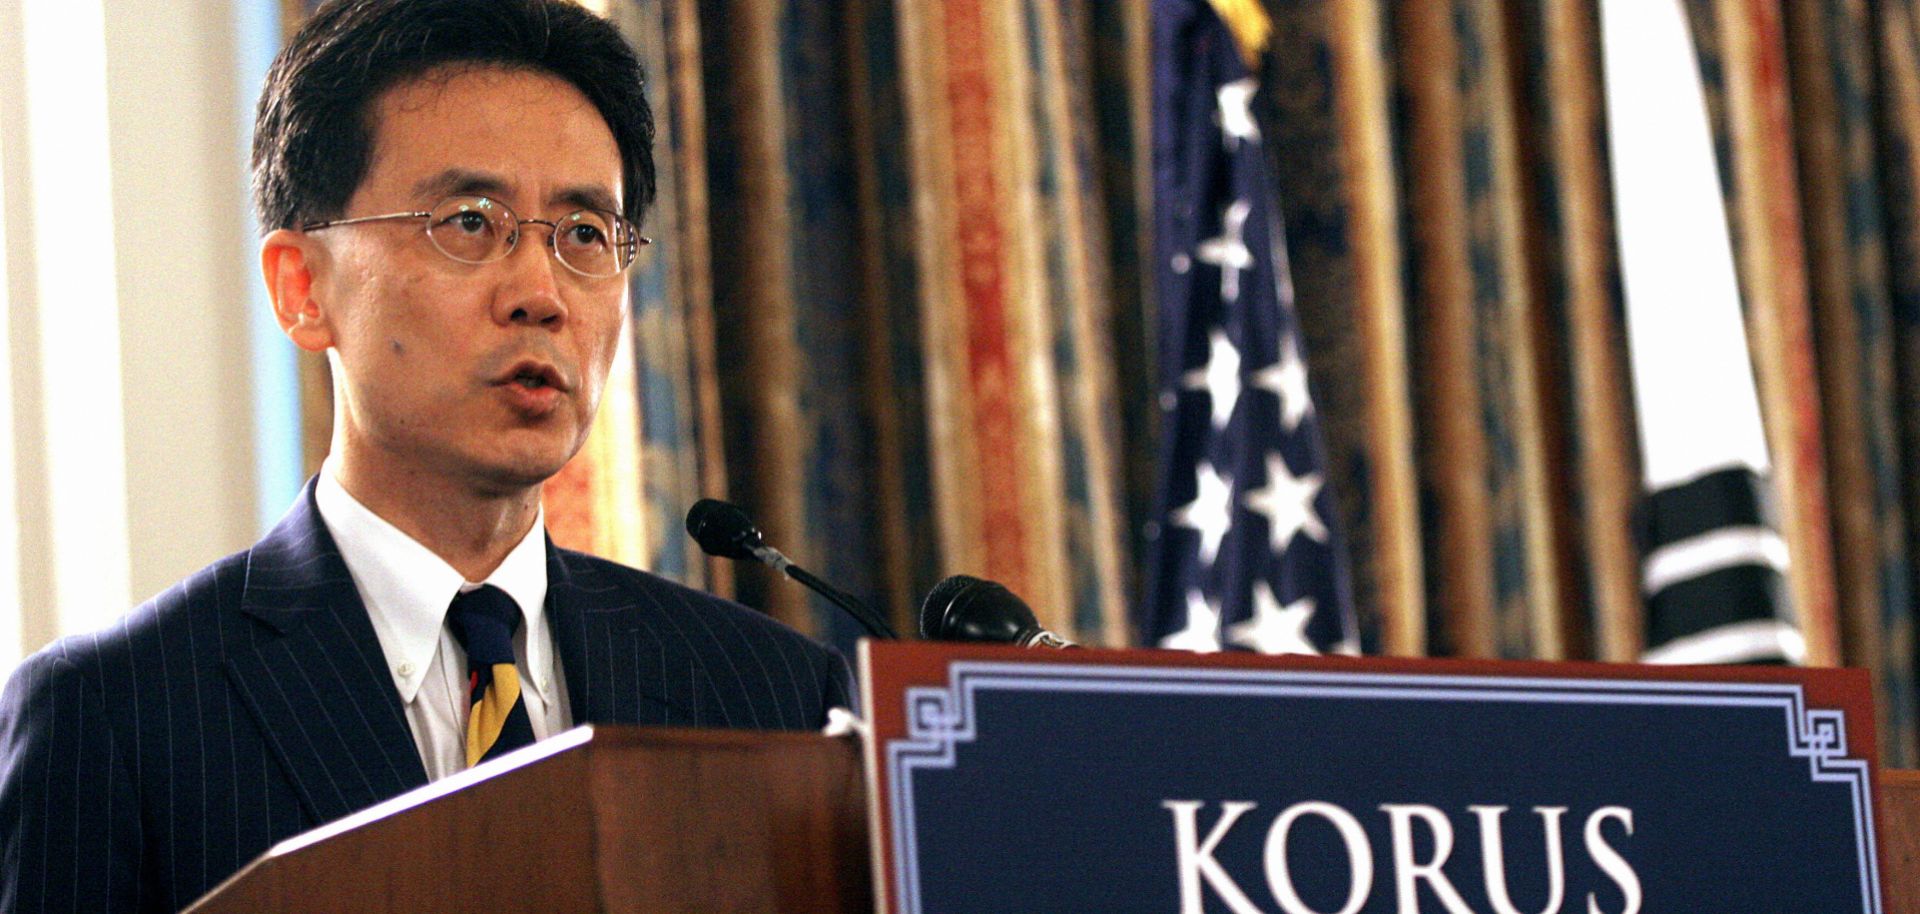 South Korean Trade Minister Kim Hyun-chong speaks at the 2007 signing of the U.S.-Korea Free Trade Agreement in Washington, D.C. Thus far, free-trade voices have held sway in the Trump administration. That might be about to change.